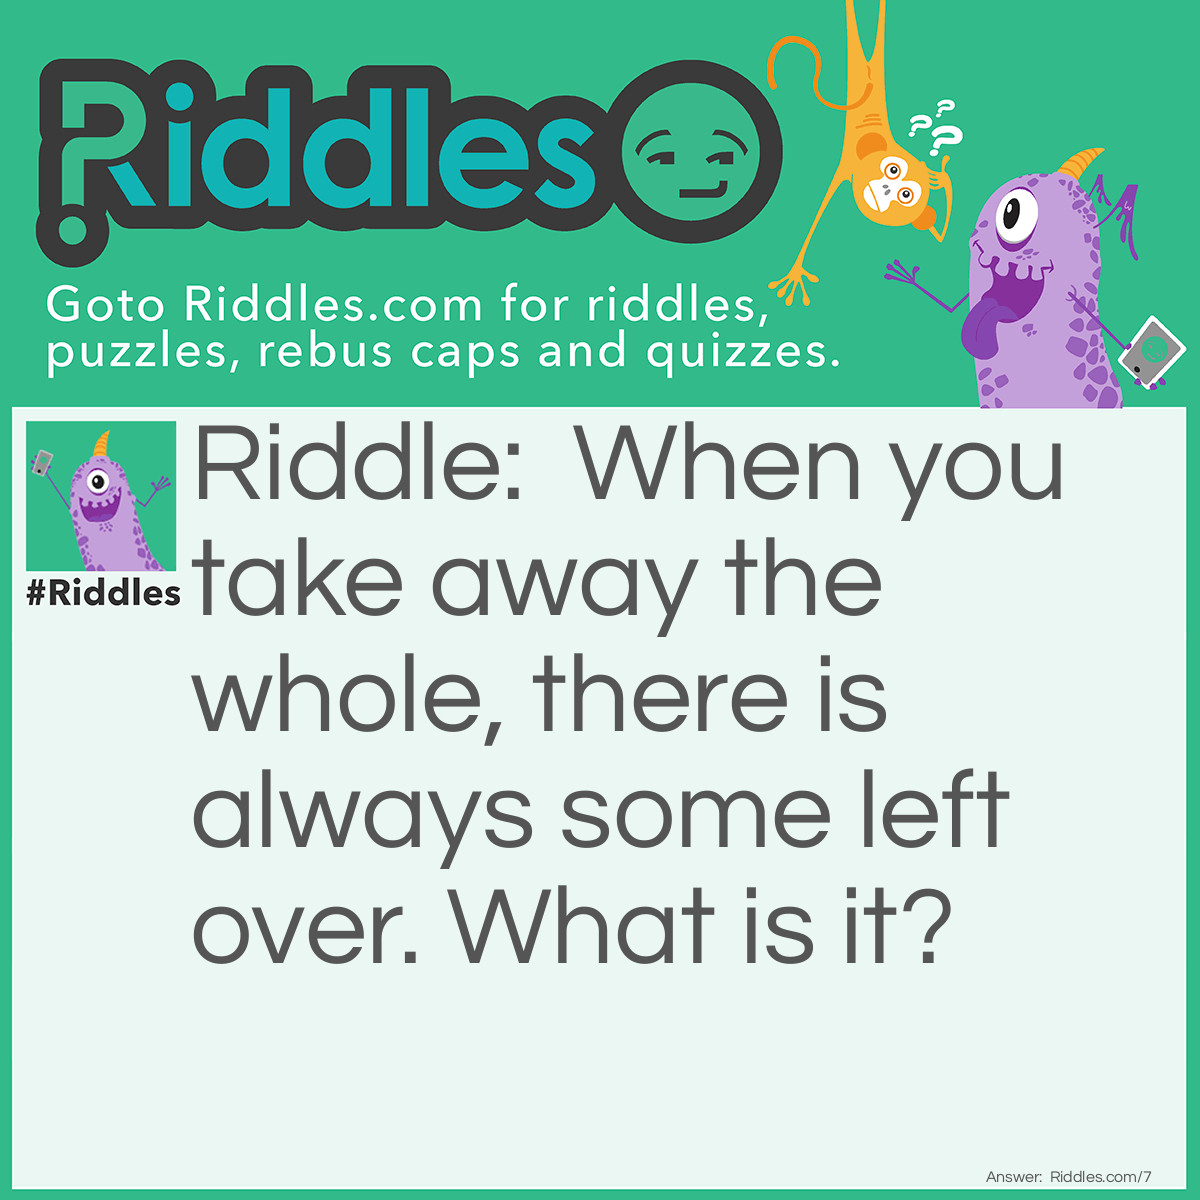 Riddle: When you take away the whole from me, there is always some left over. What am I? Answer: Wholesome!